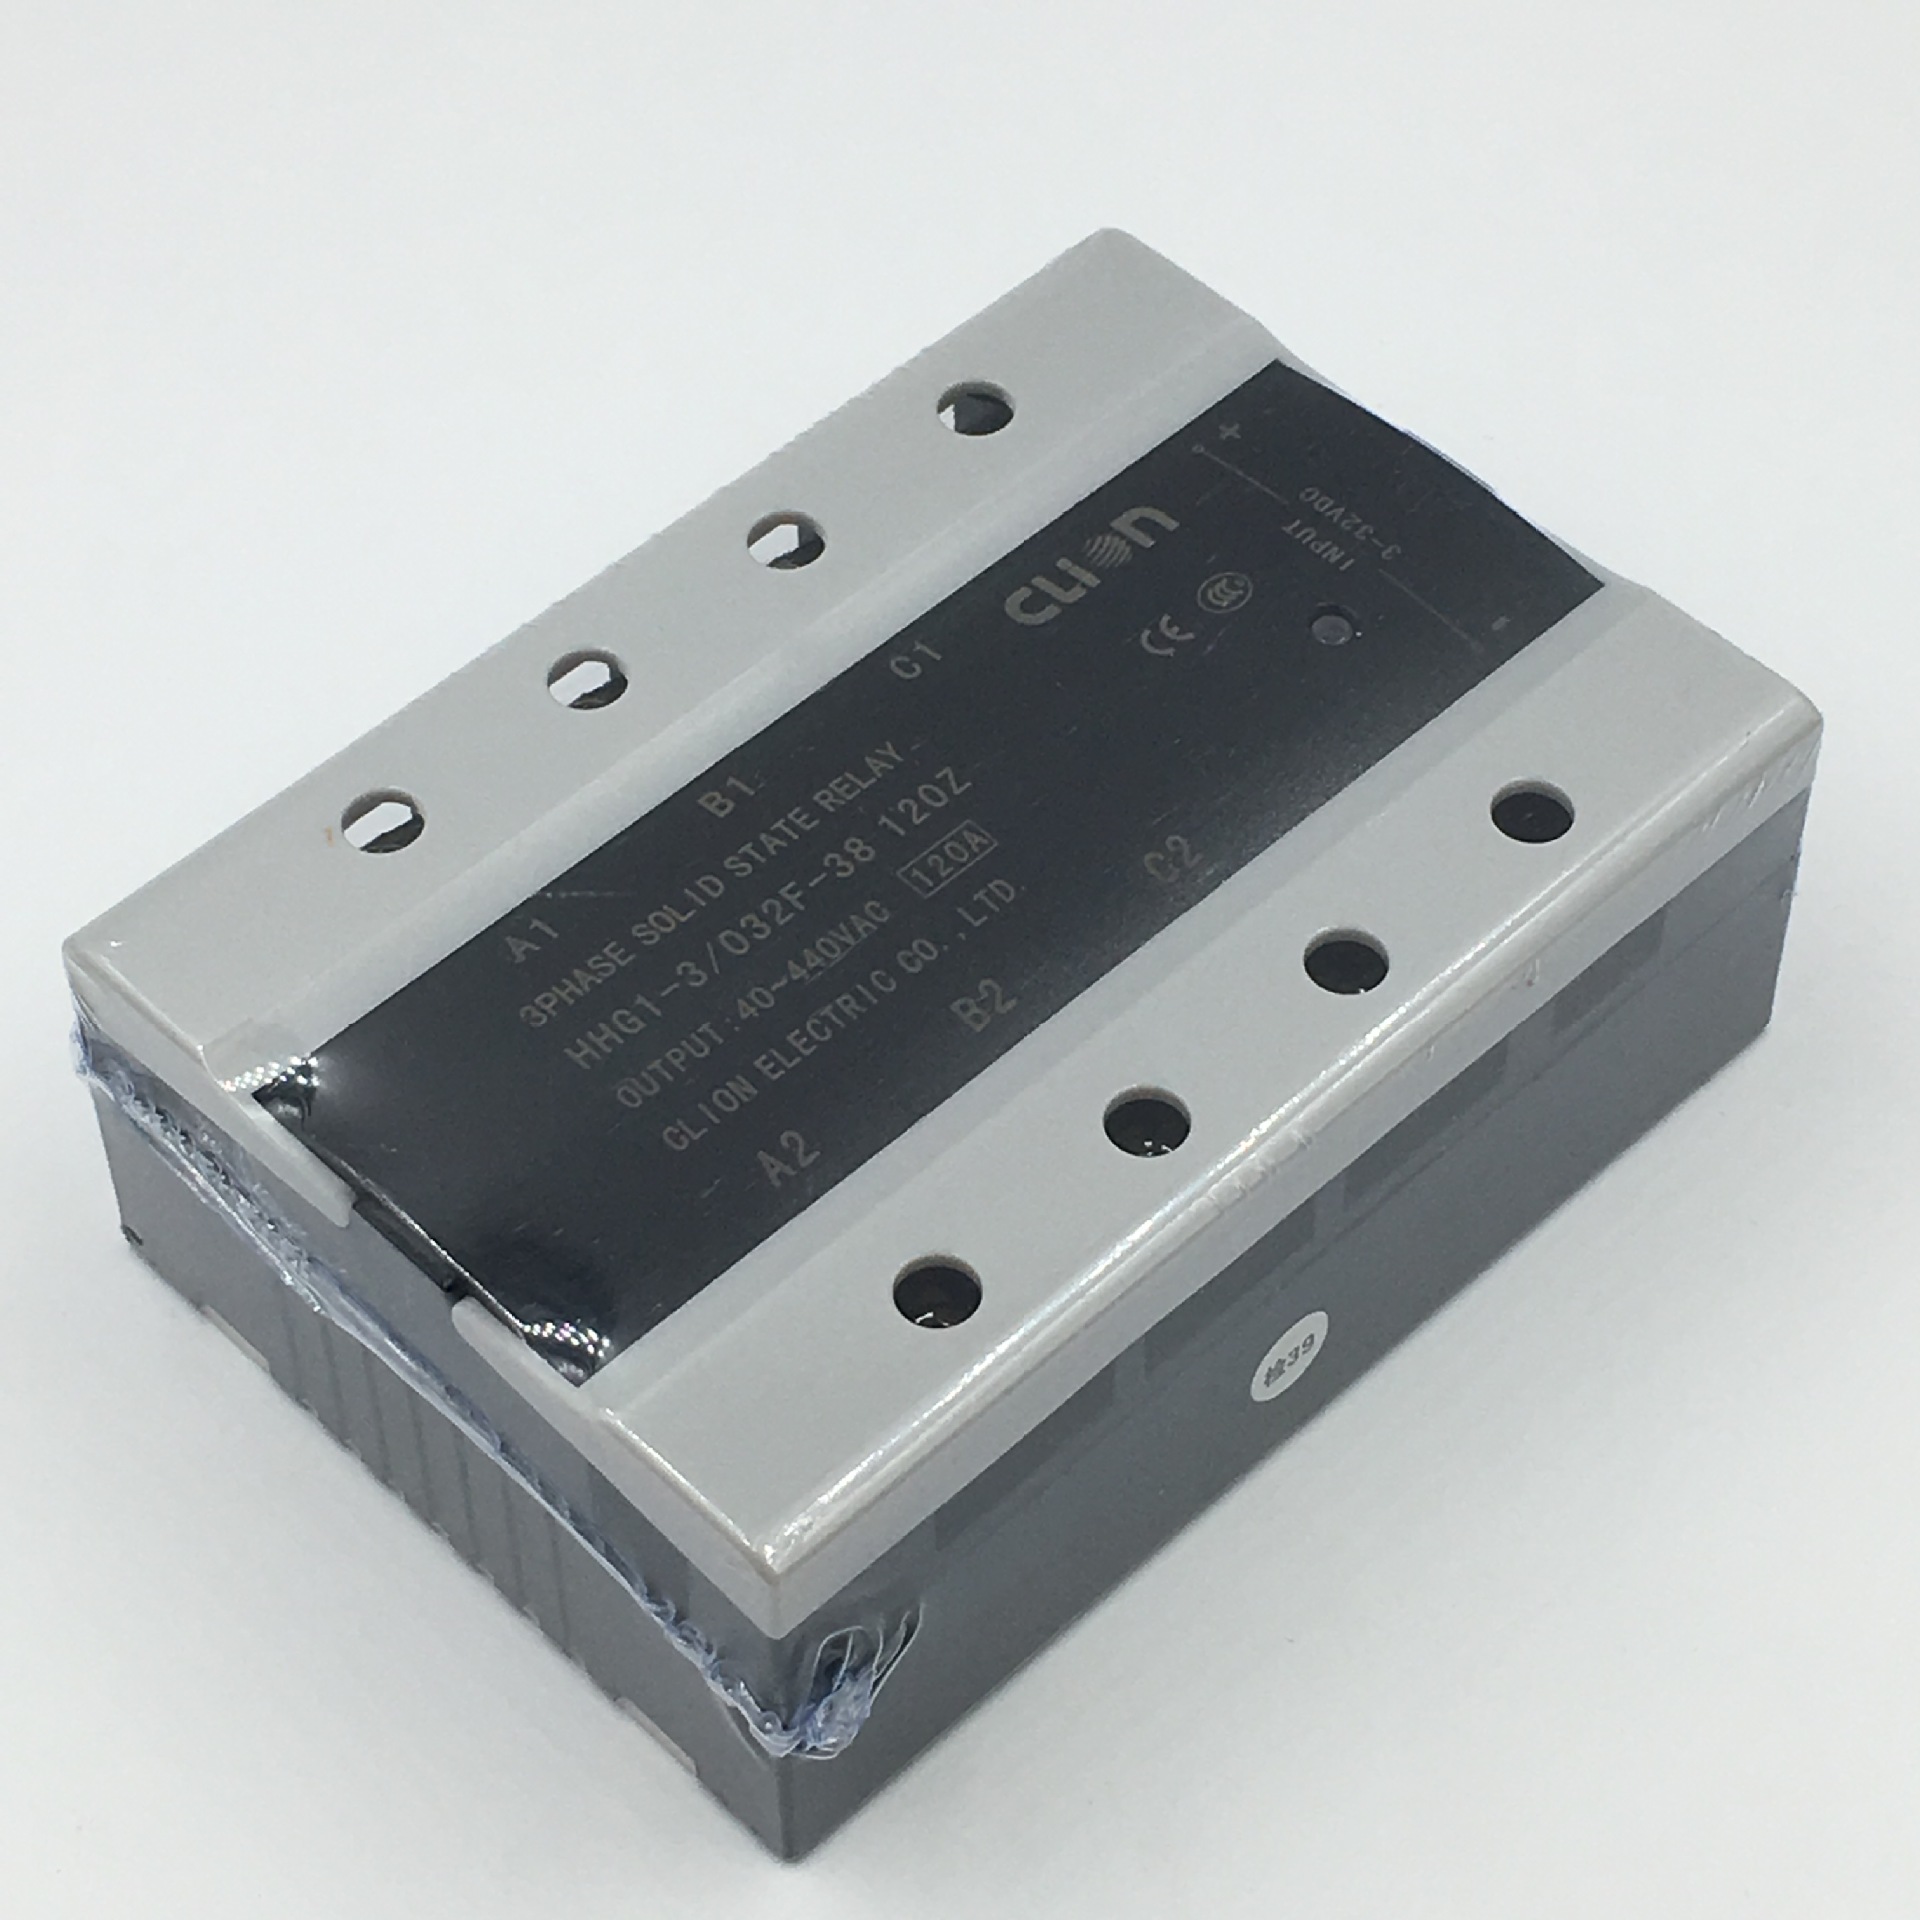 brand new Original quality goods Clion Yan Tai Three-phase High Current Solid-state relay HHG1-3/032F-38 120A